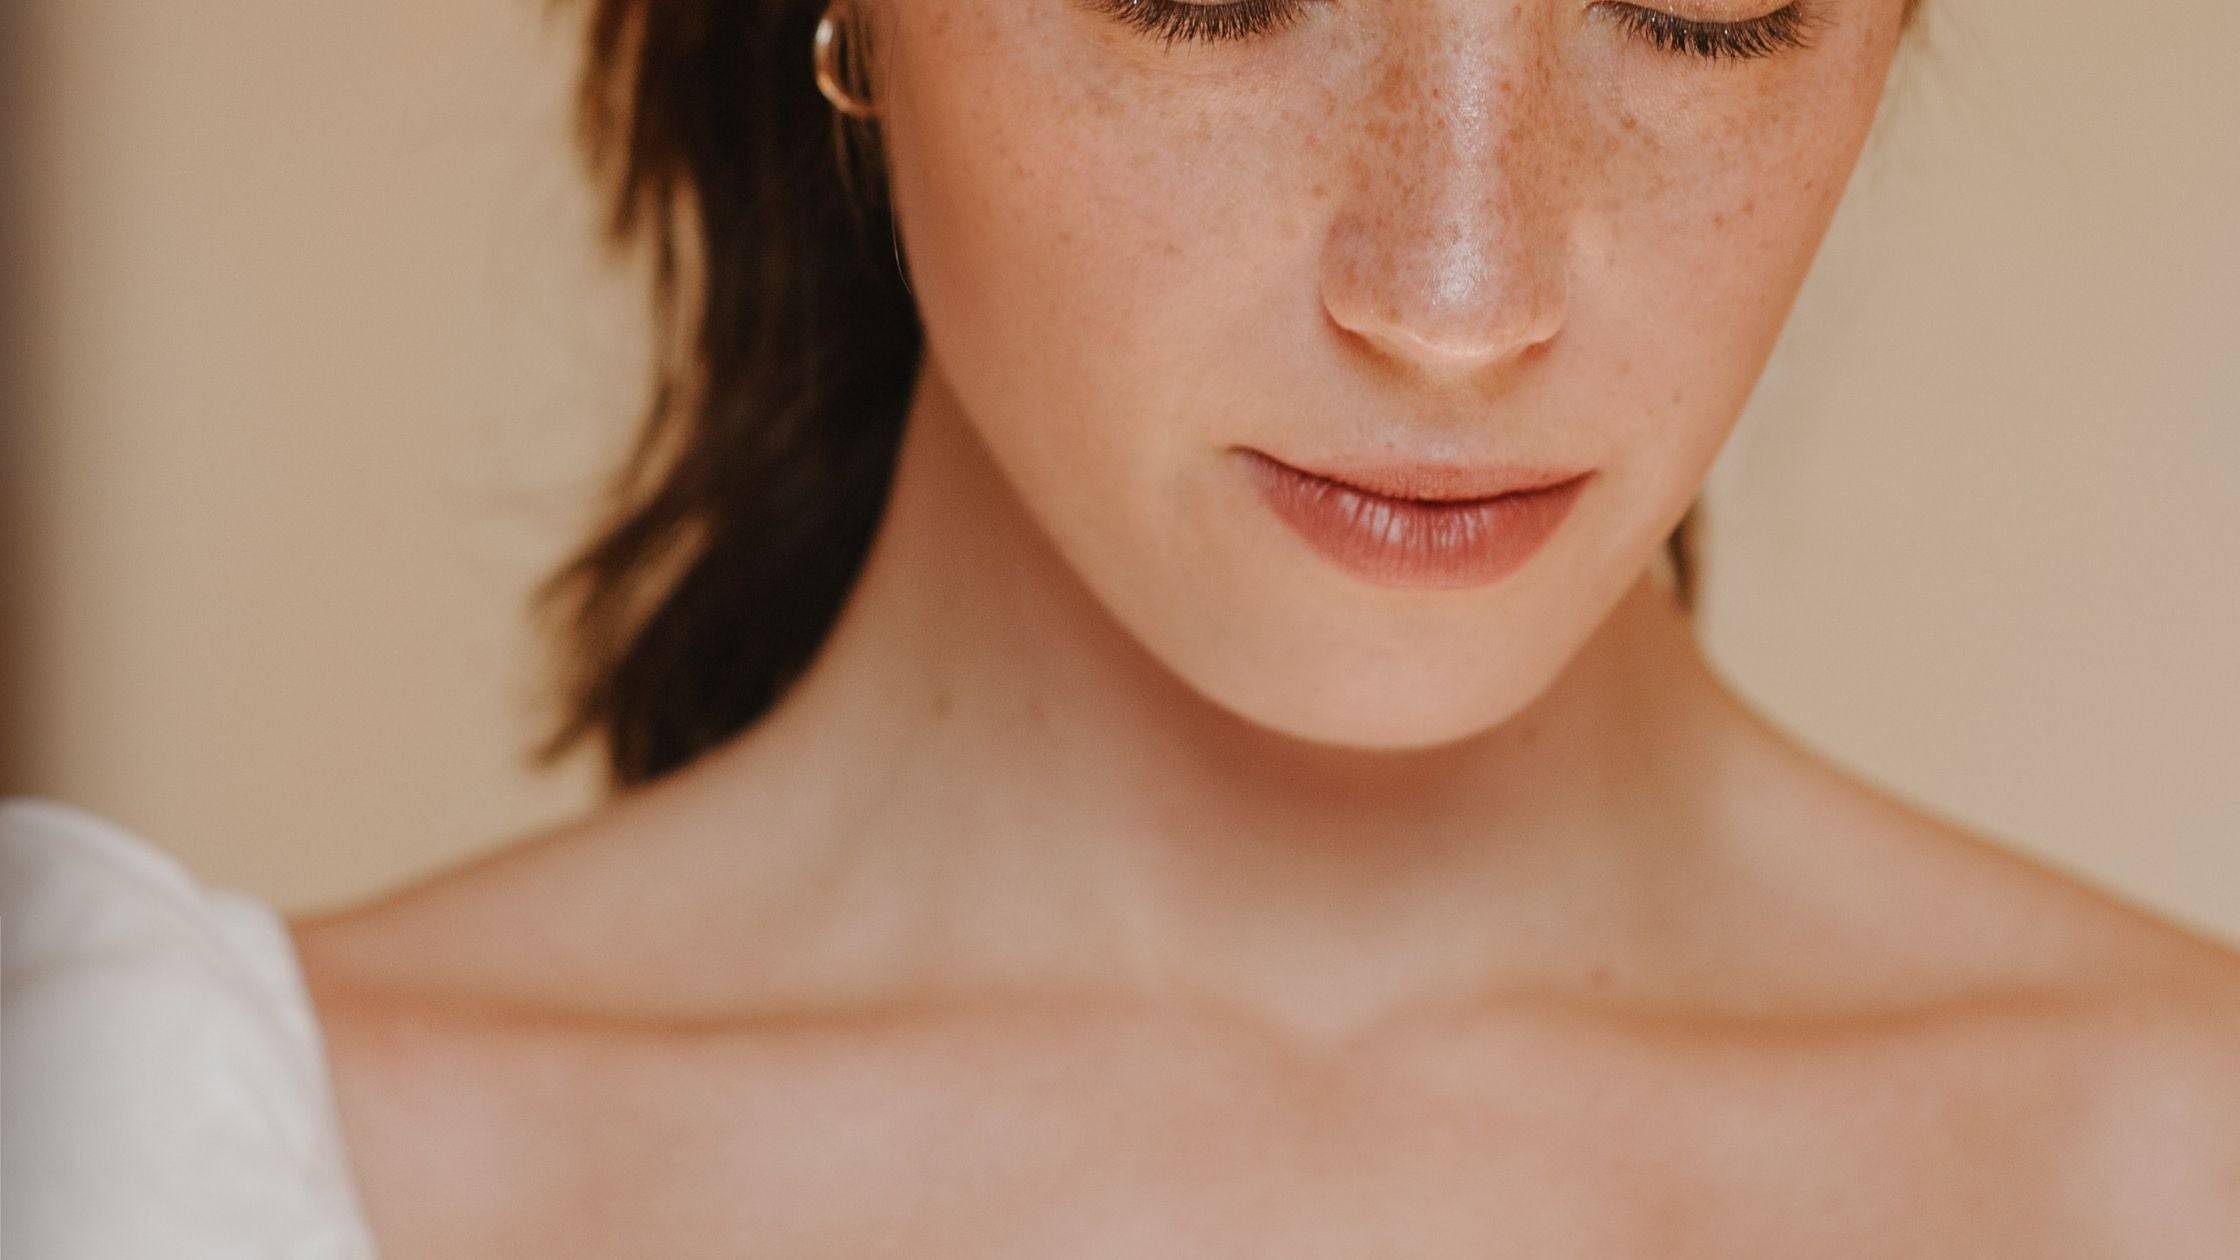 Causes of Melasma and how to treat it